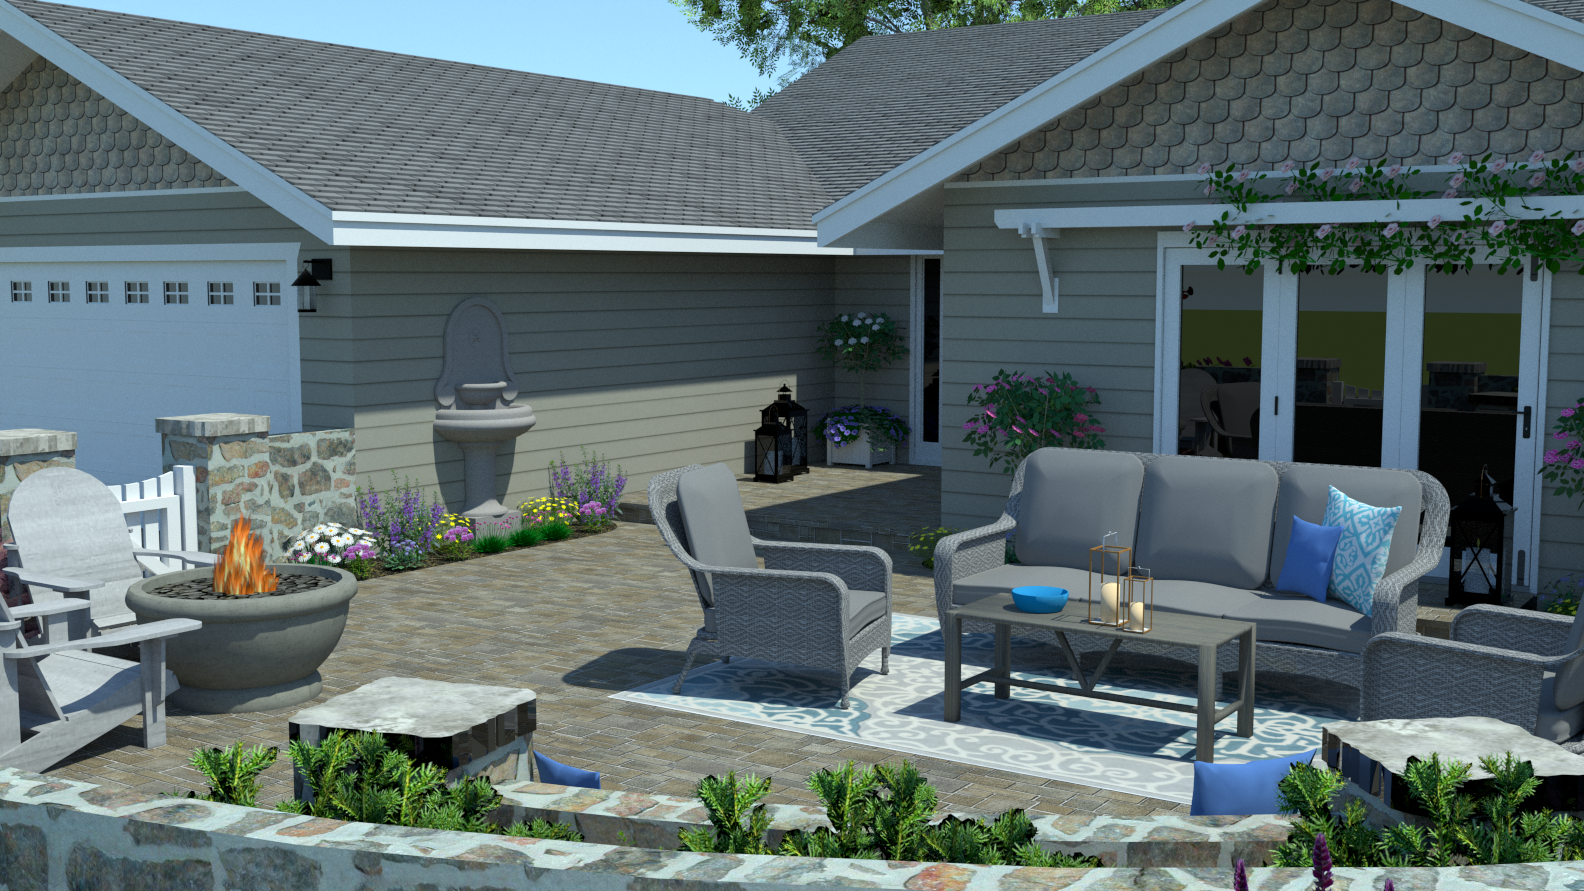 AutoSave_ANNA AND GREG FERREE_12-28-2016_SKETCHUP-2016-FRONT GARDEN_1-Scene 13.png